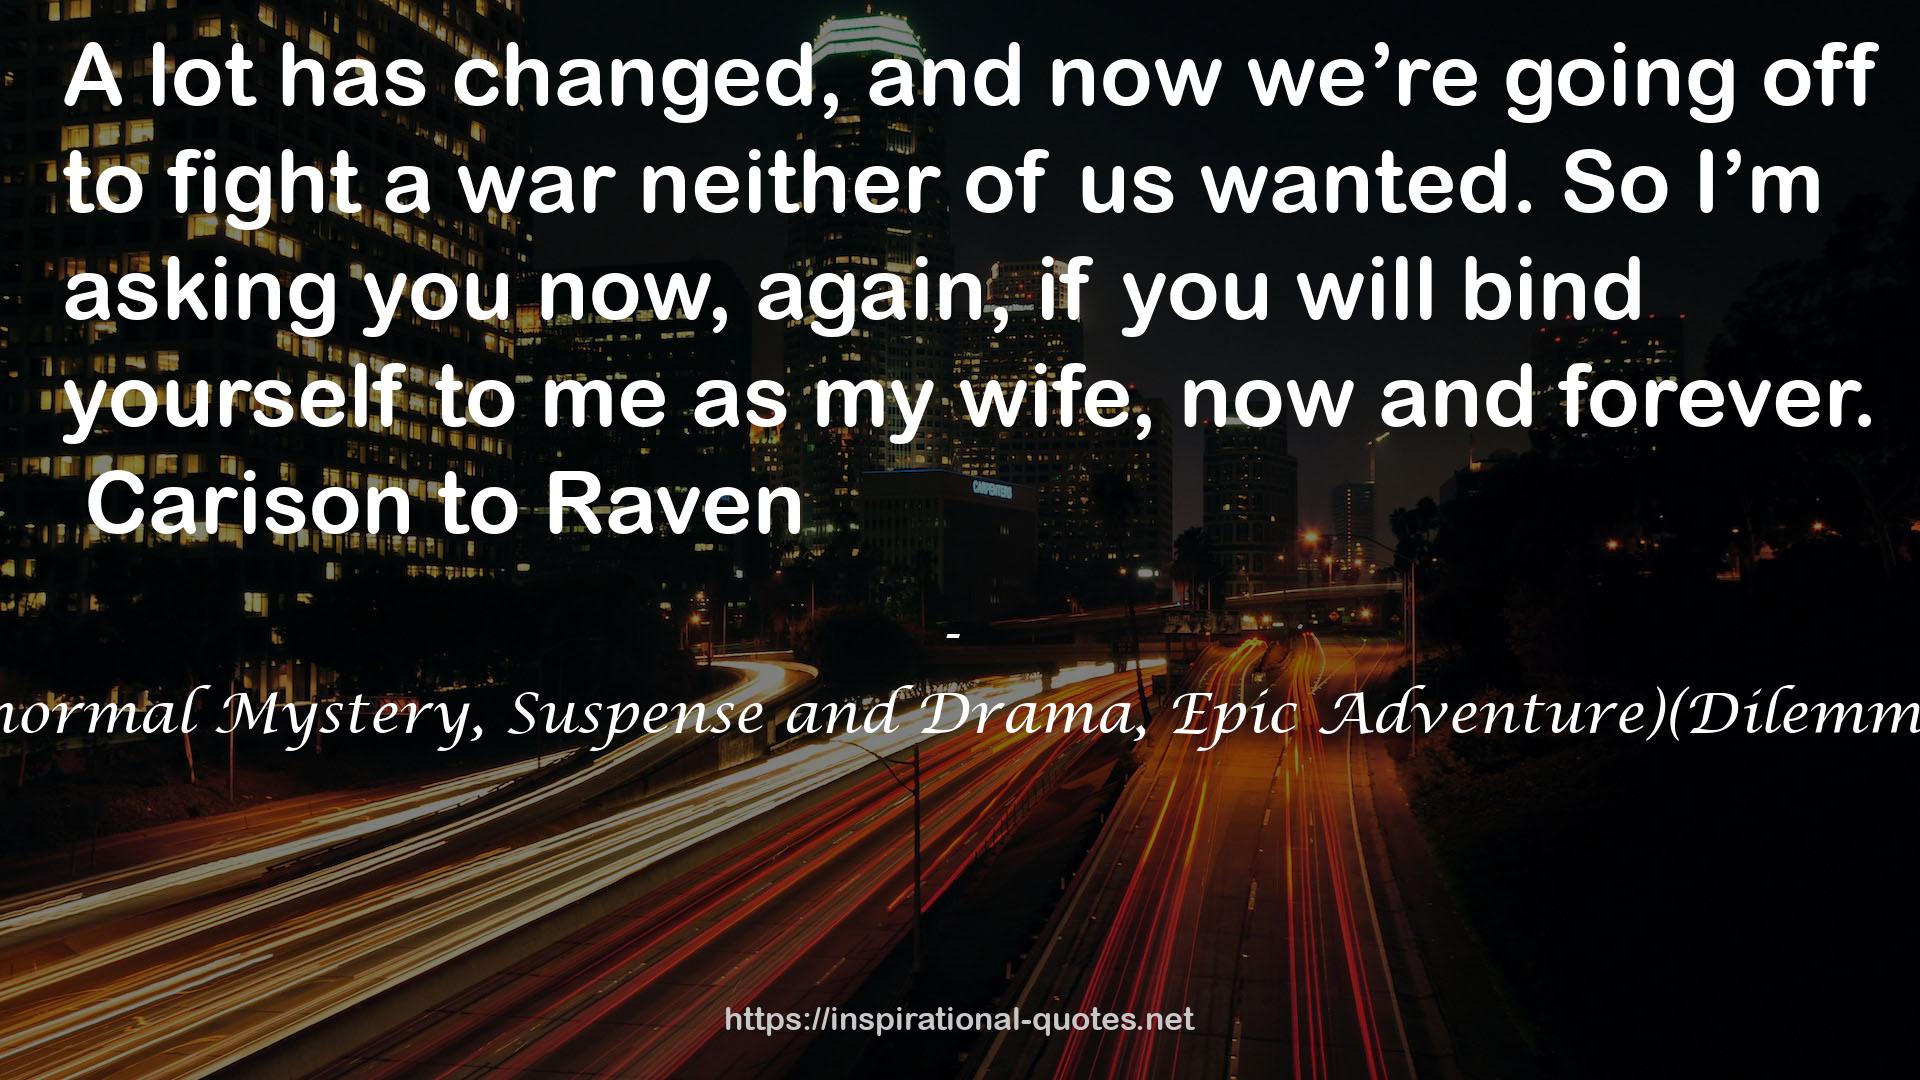 Forever Together (Paranormal Mystery, Suspense and Drama, Epic Adventure)(Dilemmas of a Dragonslayer #7) QUOTES